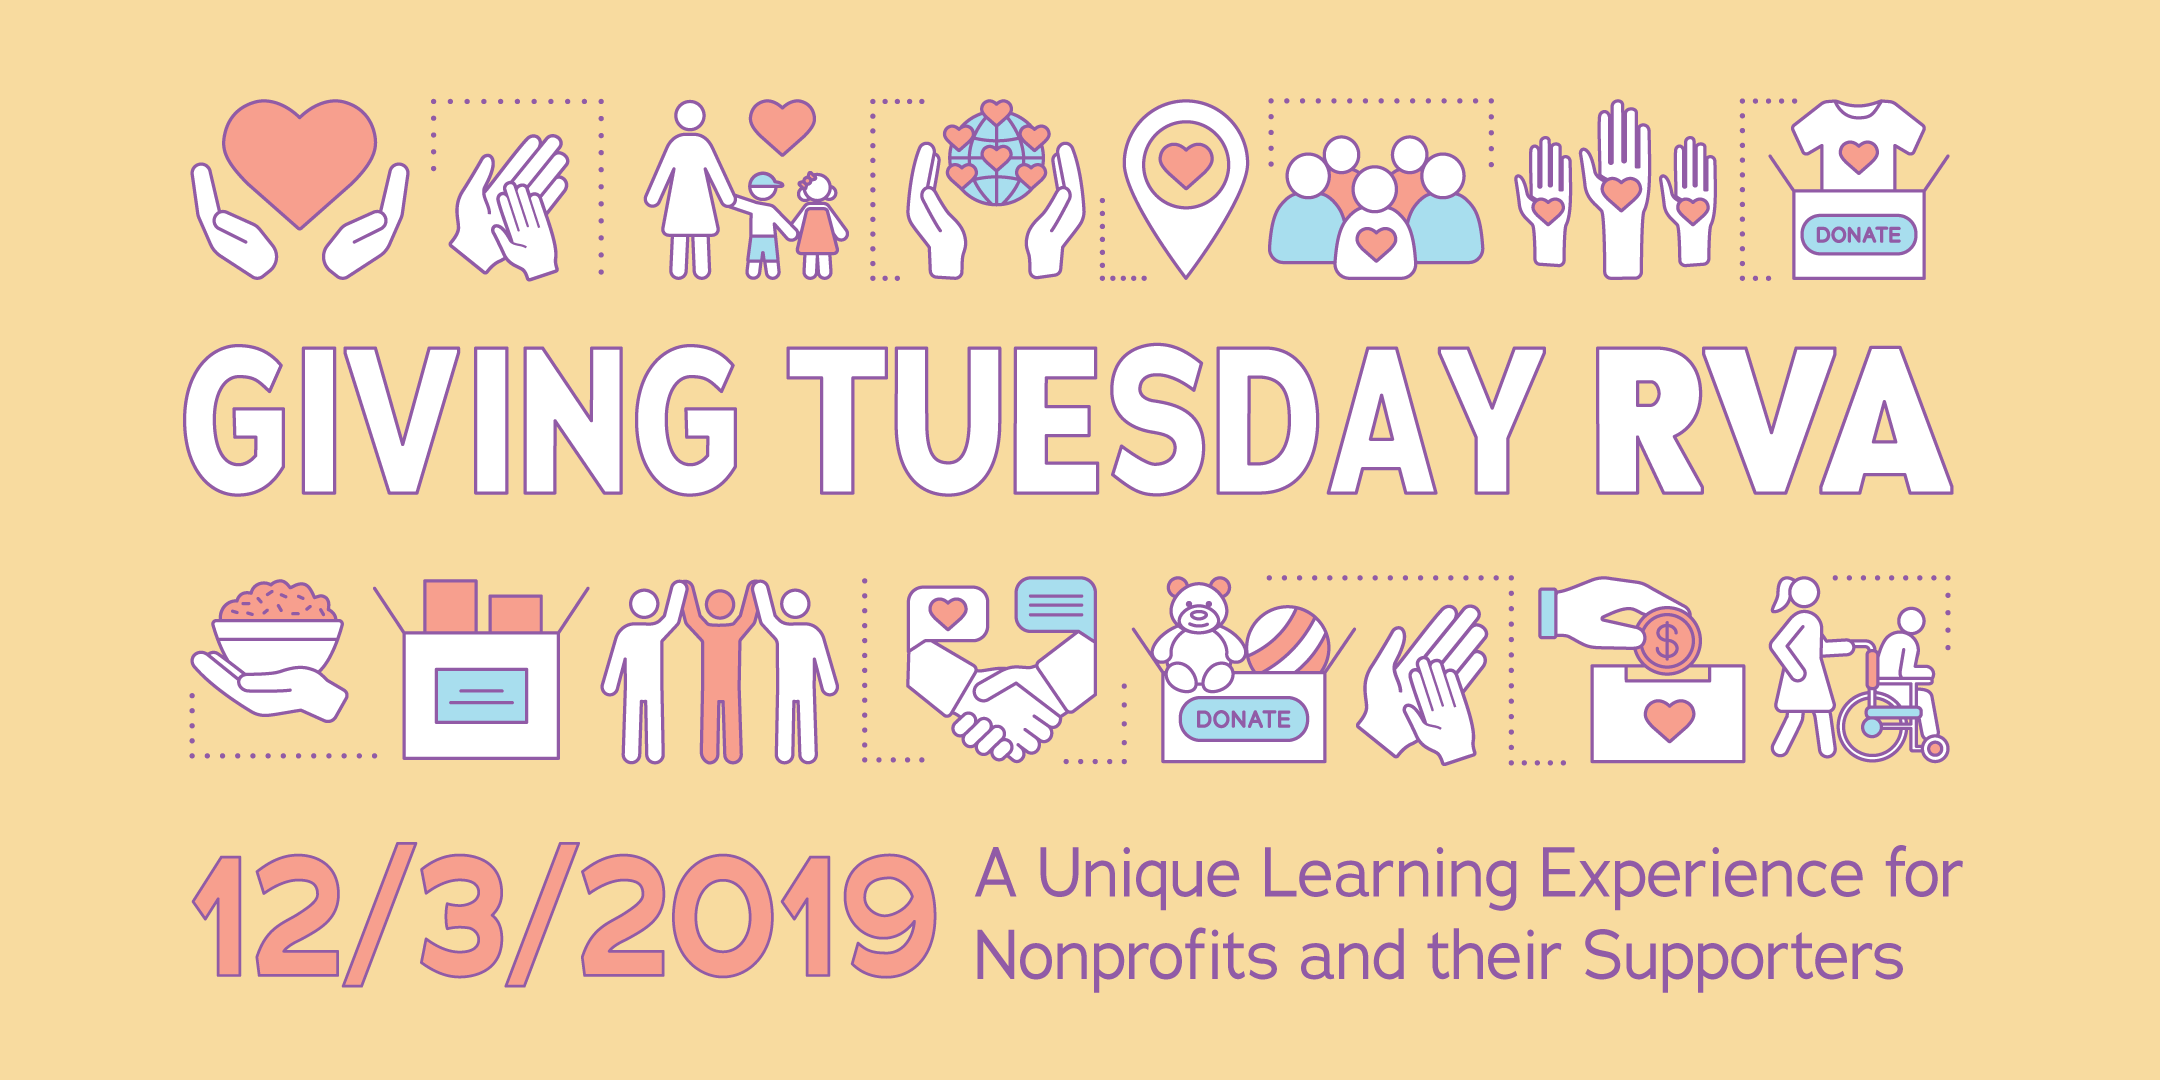 GivingTuesdayRVA - A Learning Experience for Nonprofits & their Supporters